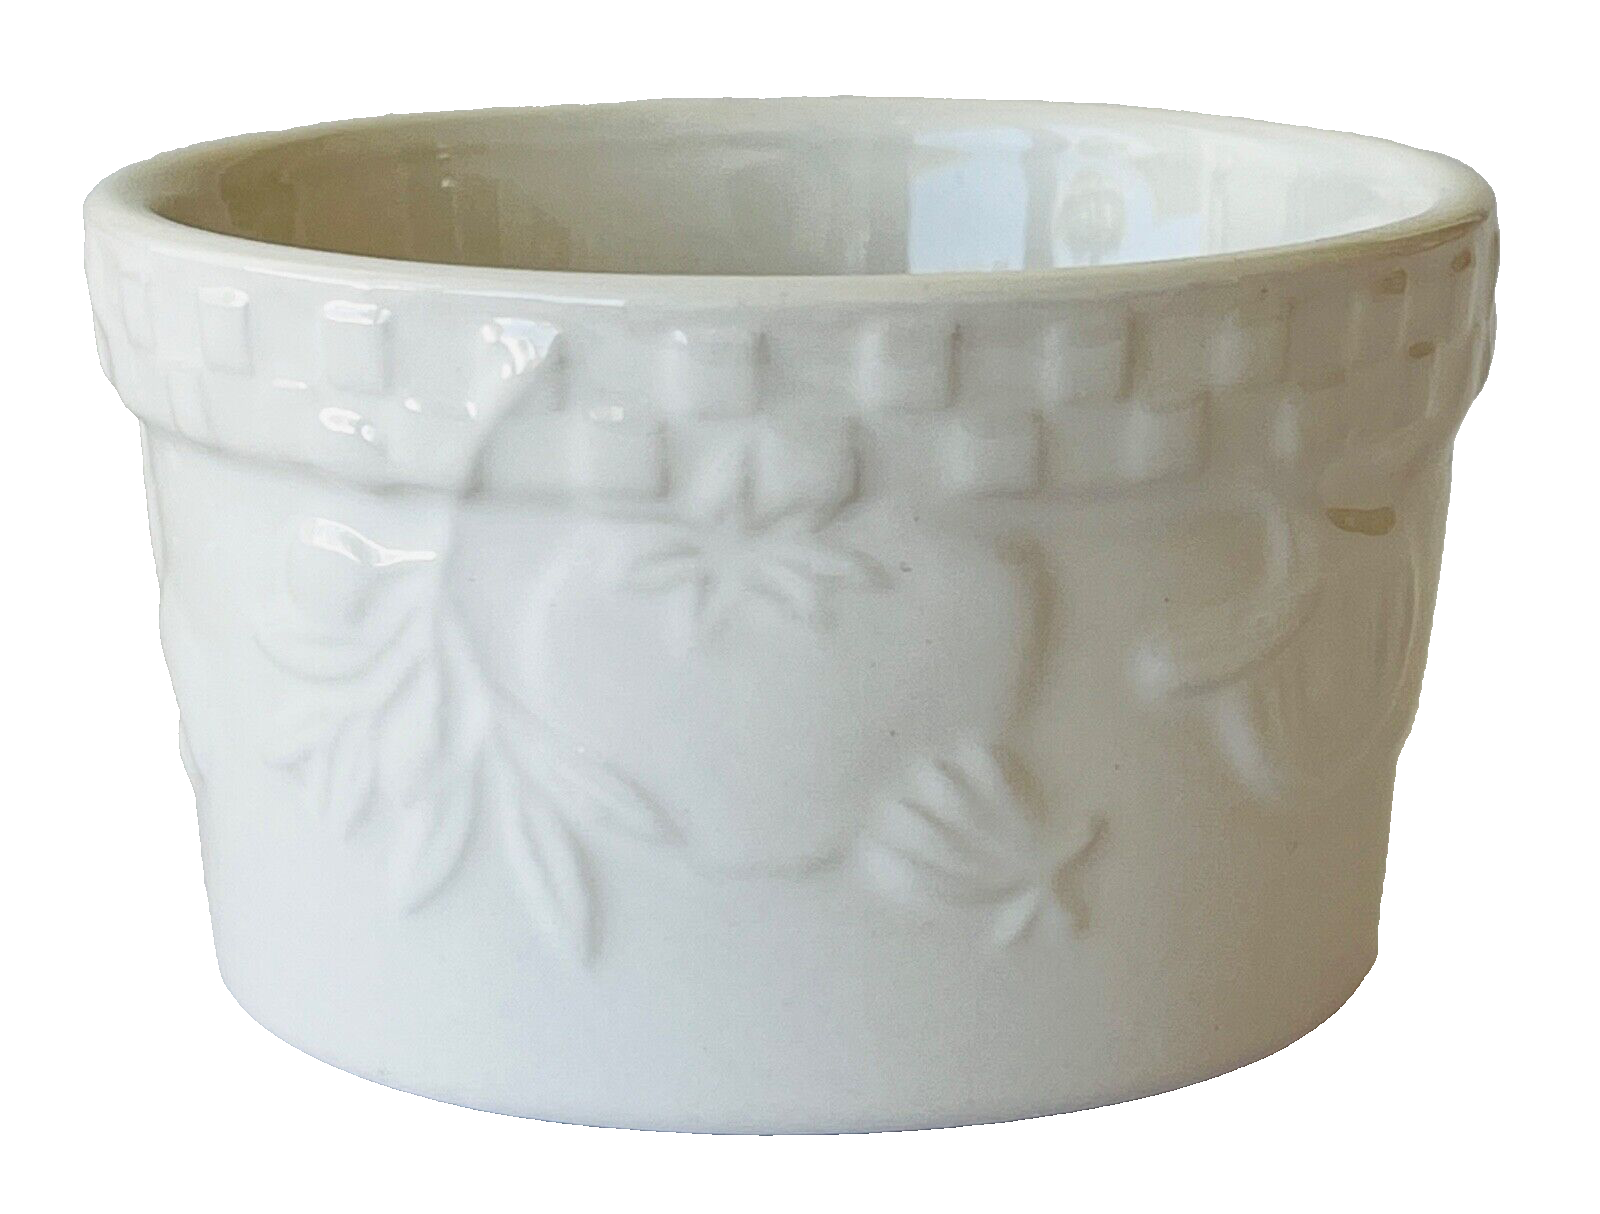 Primary image for White Stoneware Small Embossed Bowl for Sauces etc Signature Housewares 2"x3.5"